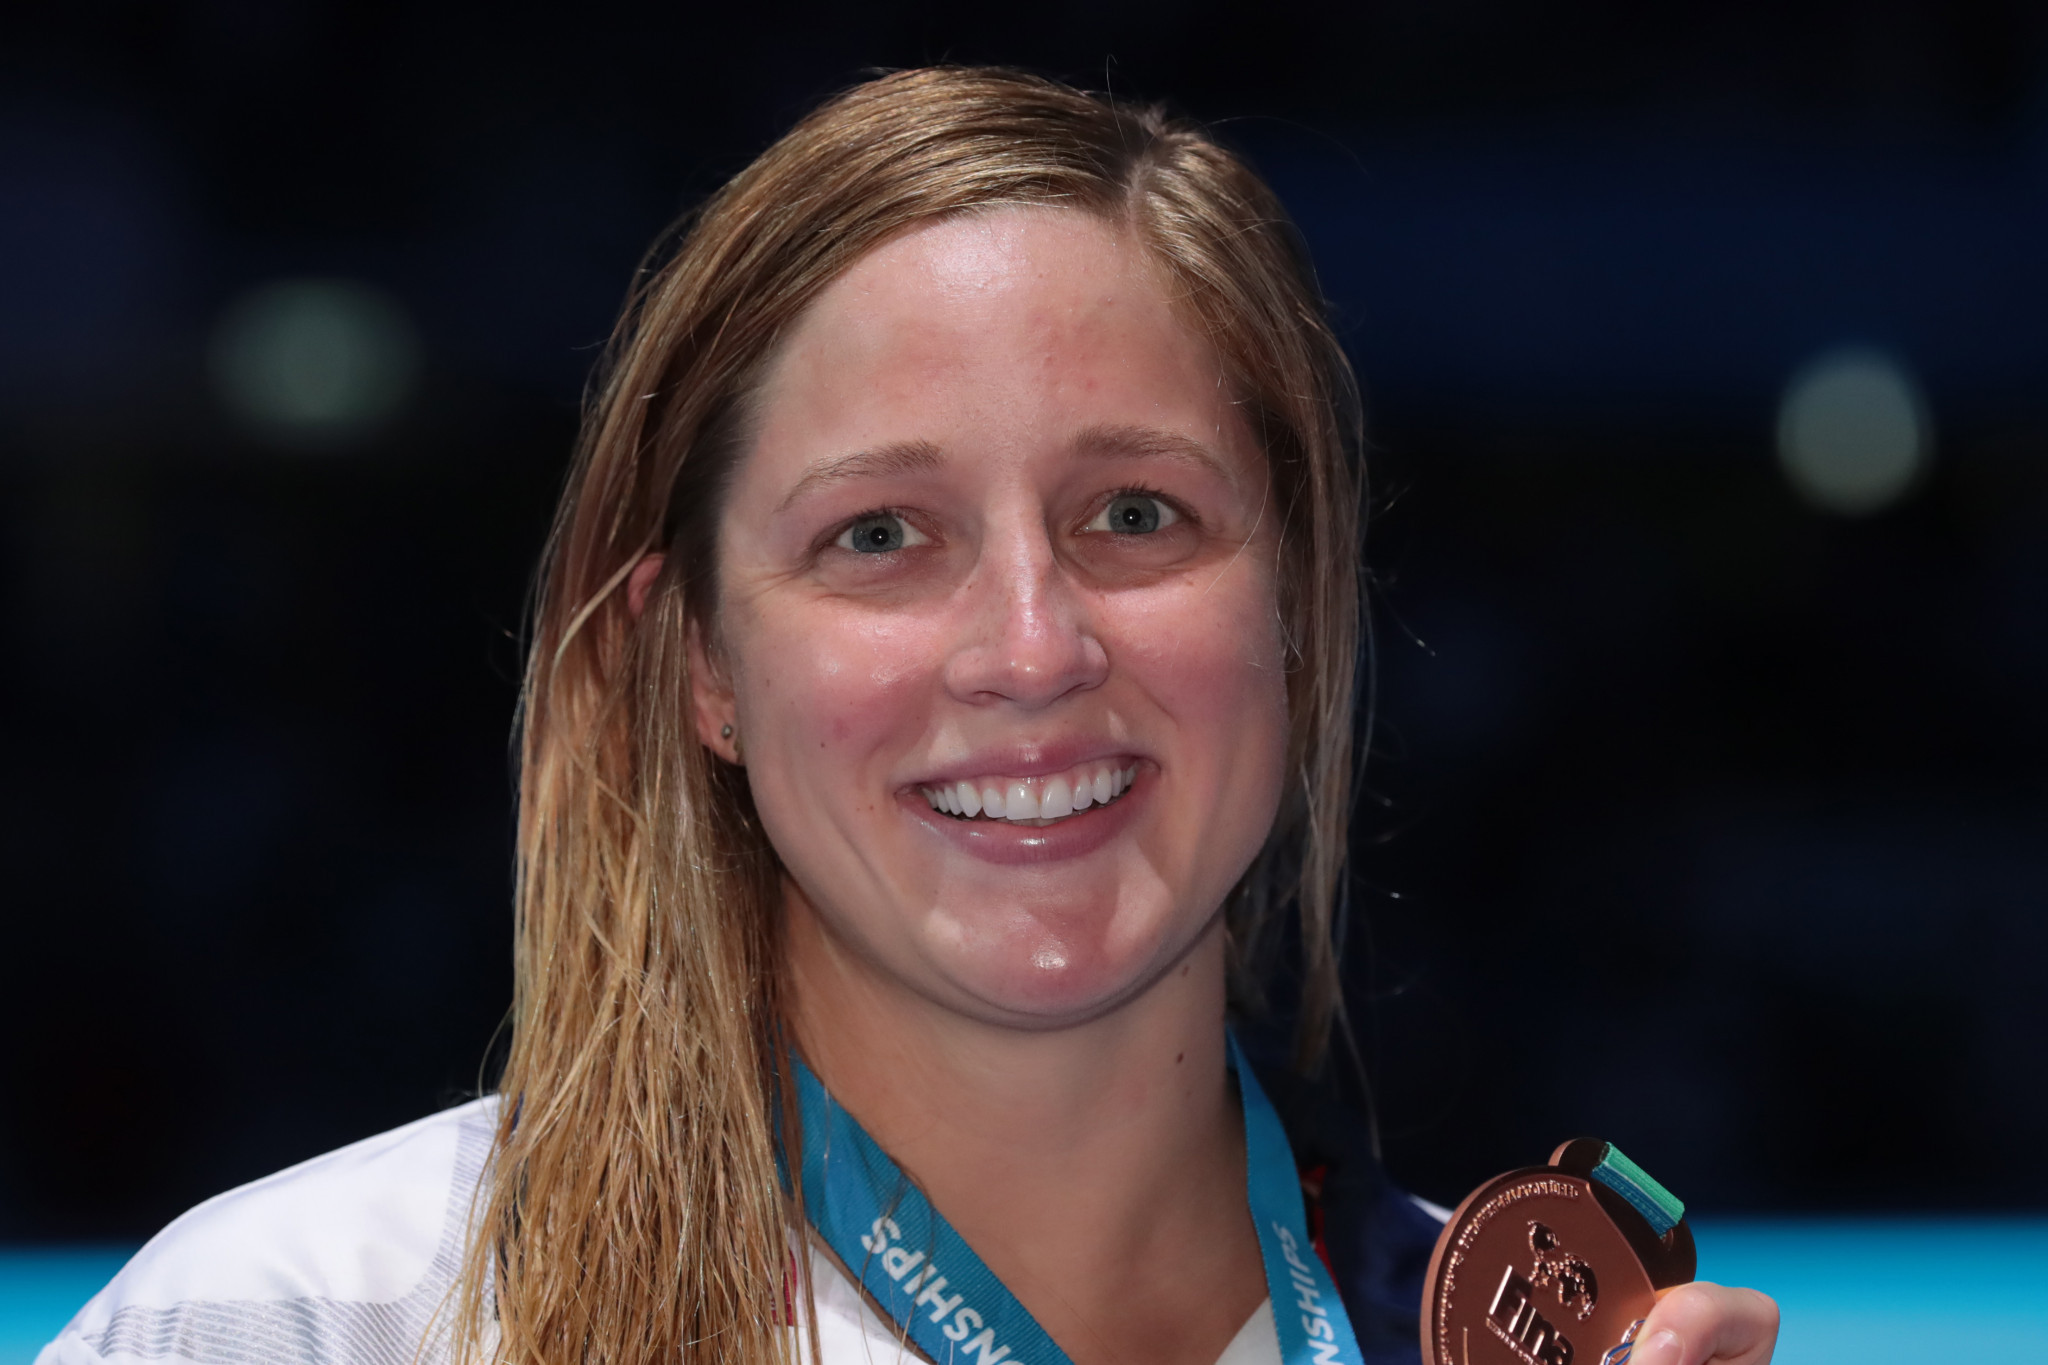 World champion swimmer Cox has doping ban cut to six months at CAS